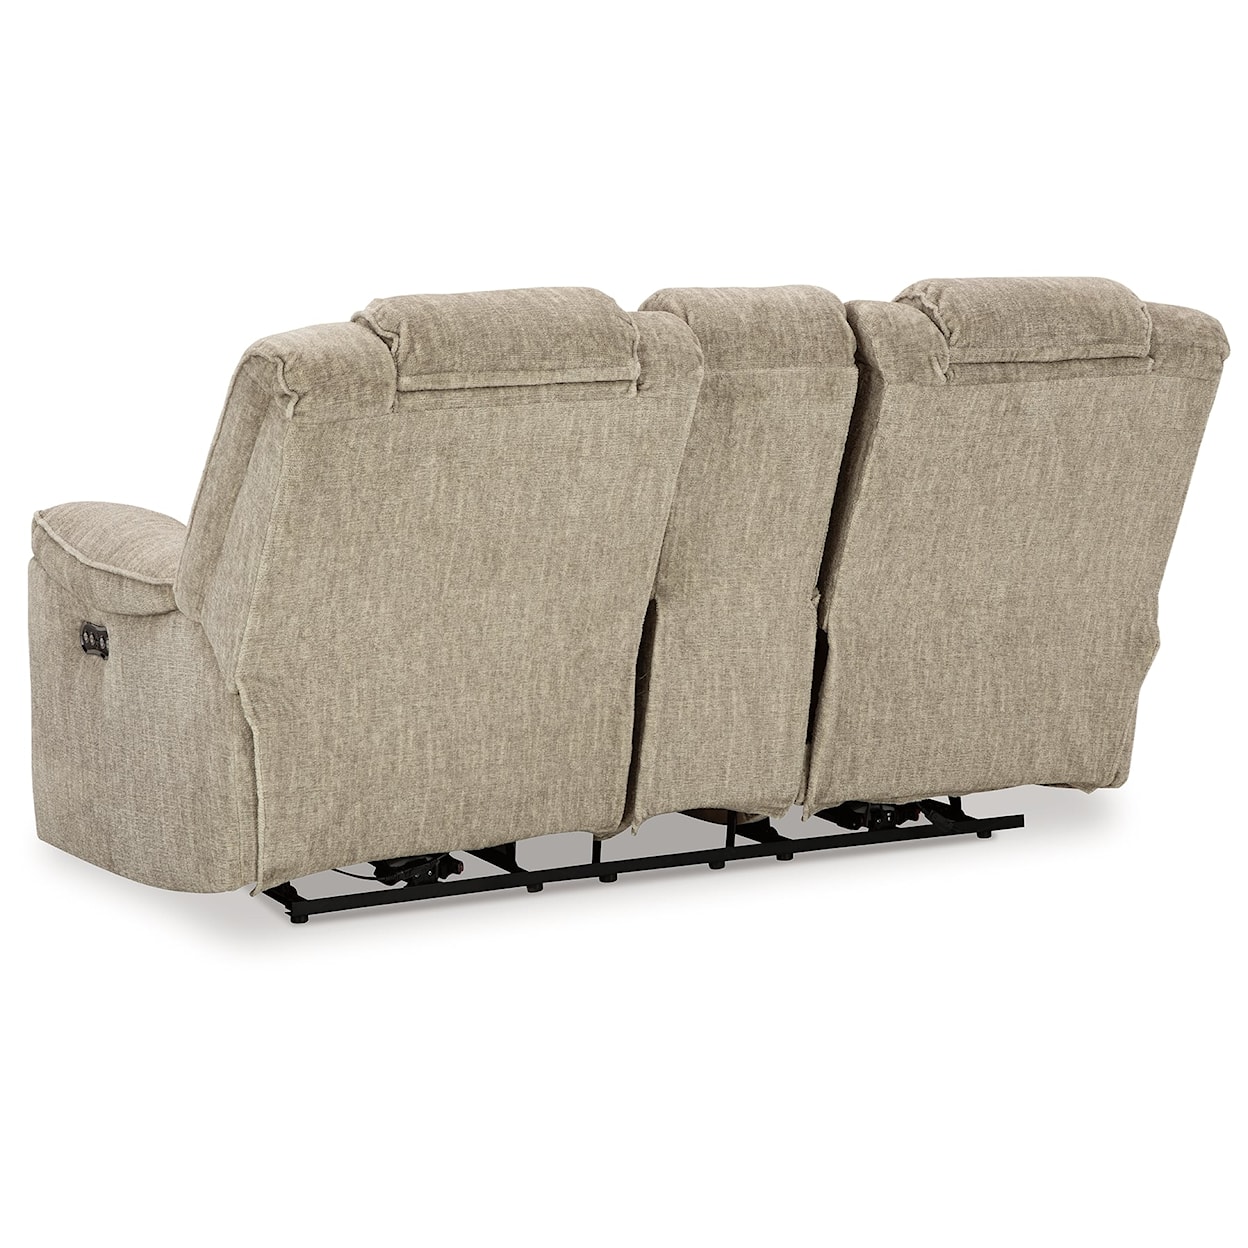 Signature Hindmarsh Power Reclining Loveseat With Console